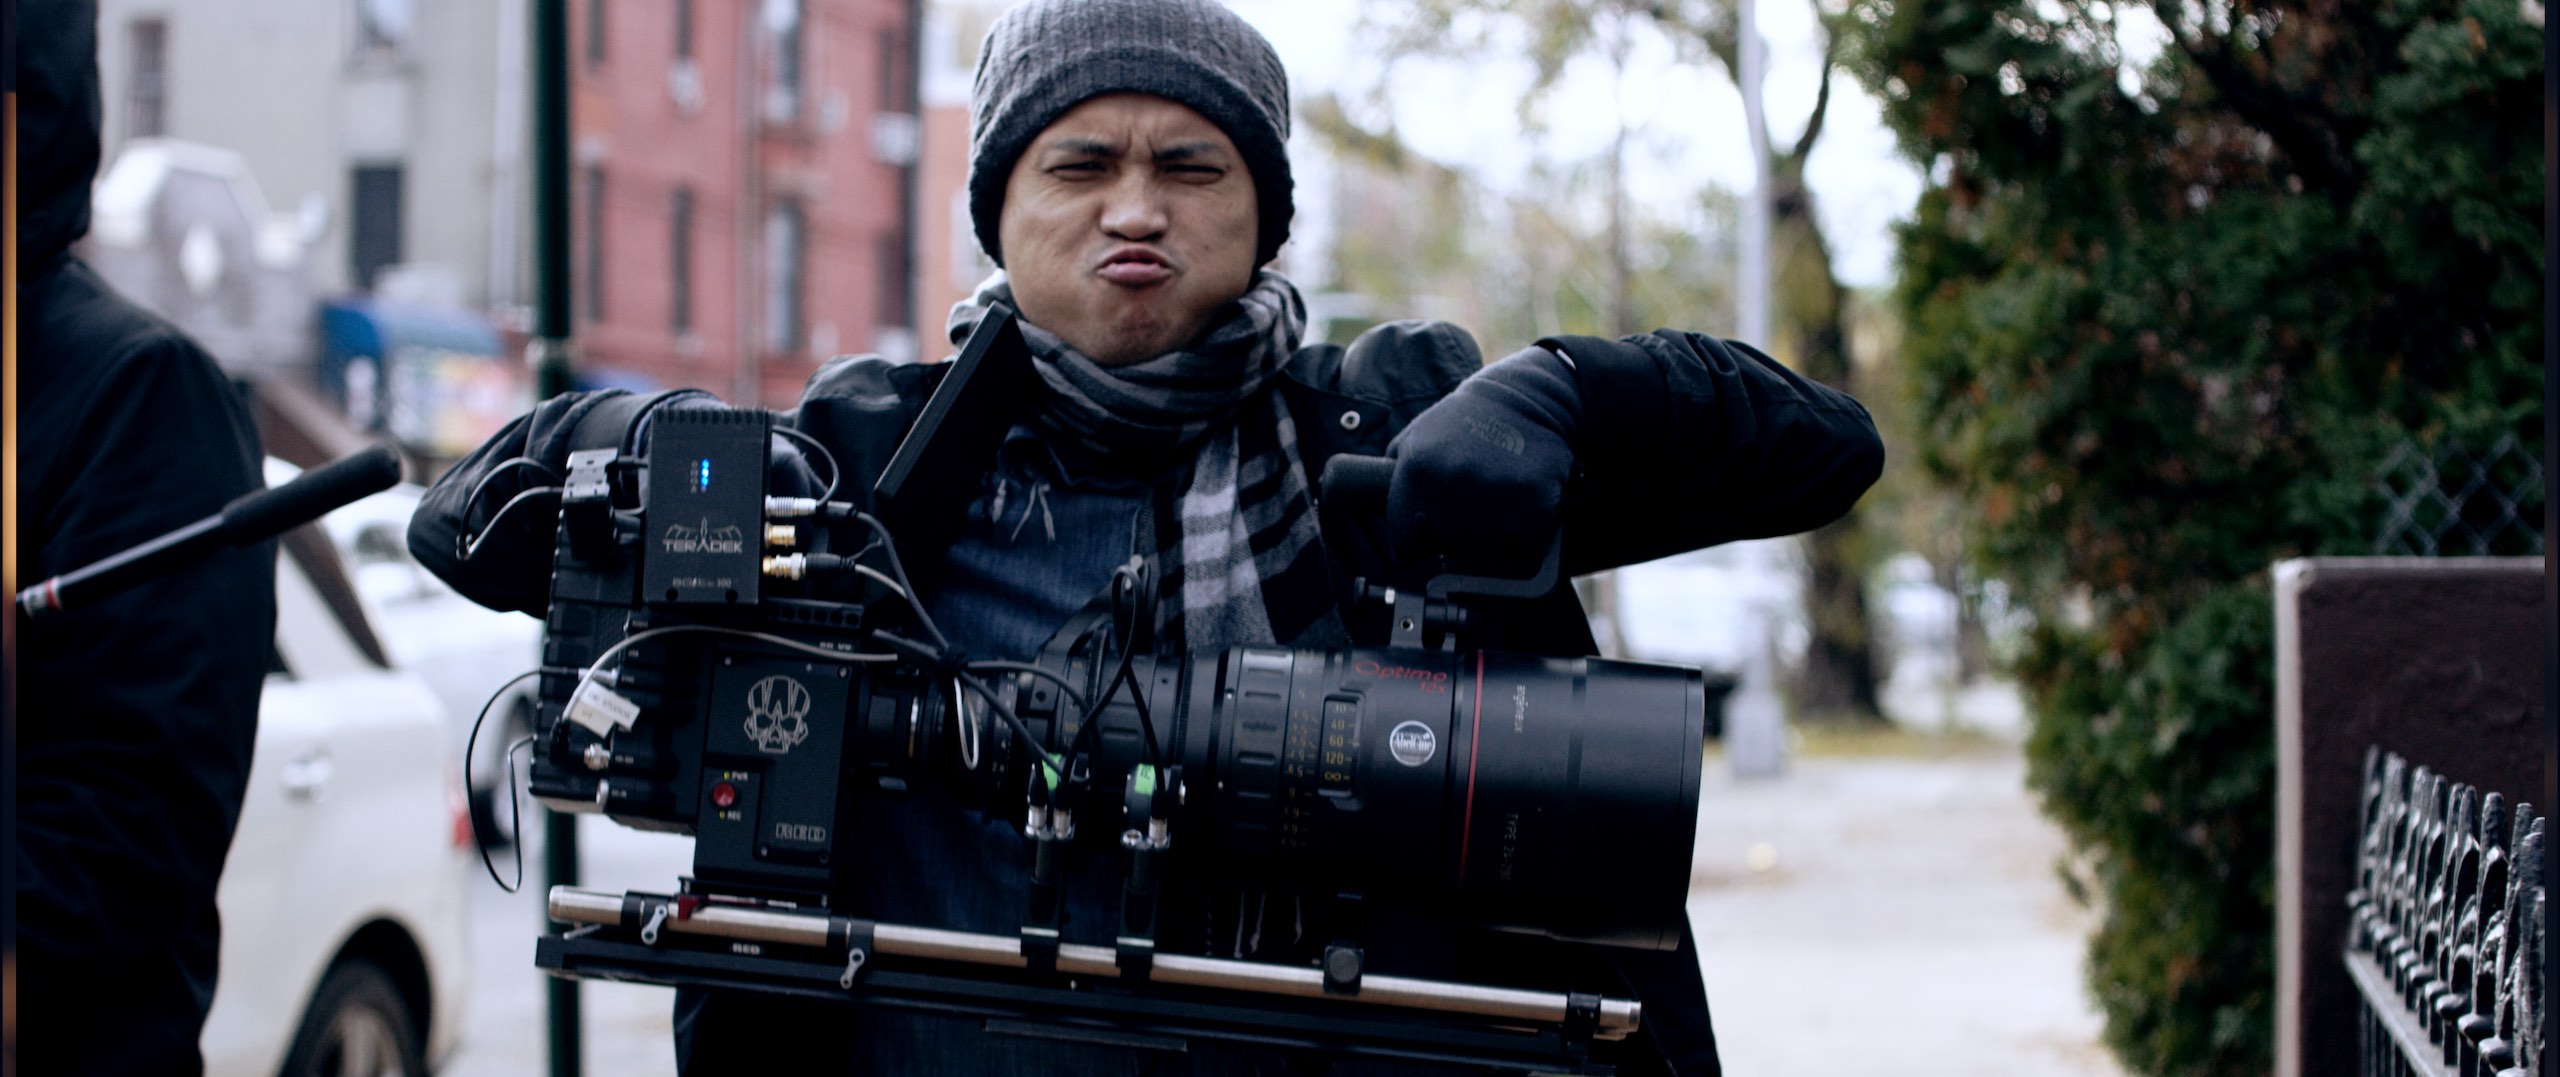 The Dailies Season 2 Episode 8 RED Cameras RED cameras Crew member wearing gray knit cap grimacing as he lifts camera